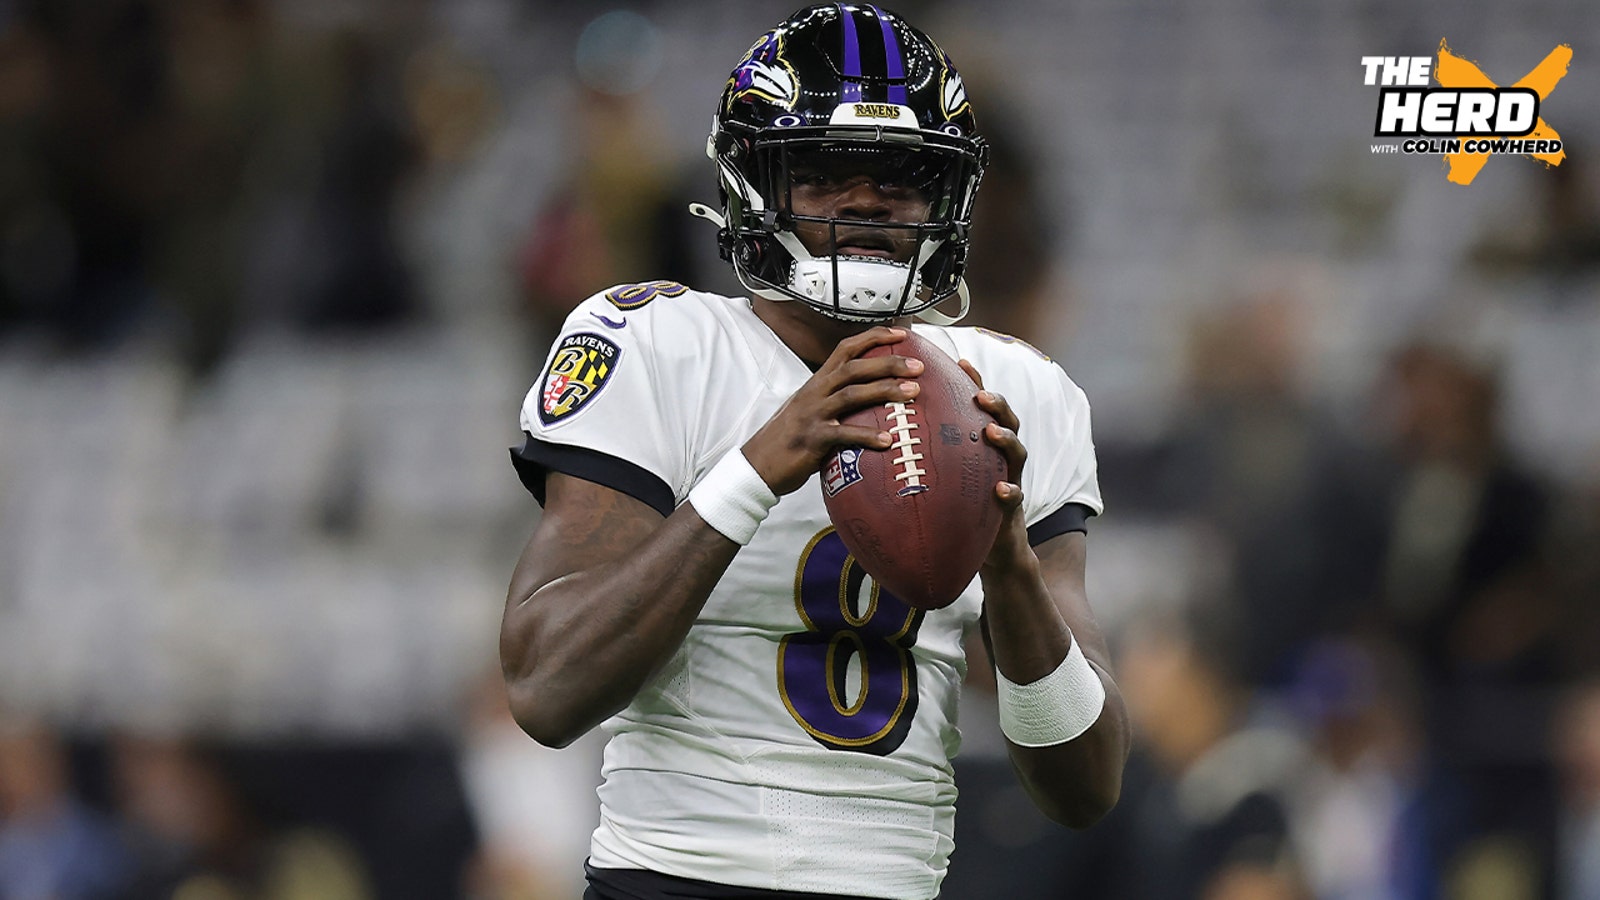 Lamar Jackson continues to show his value to the Ravens after the win against the Saints